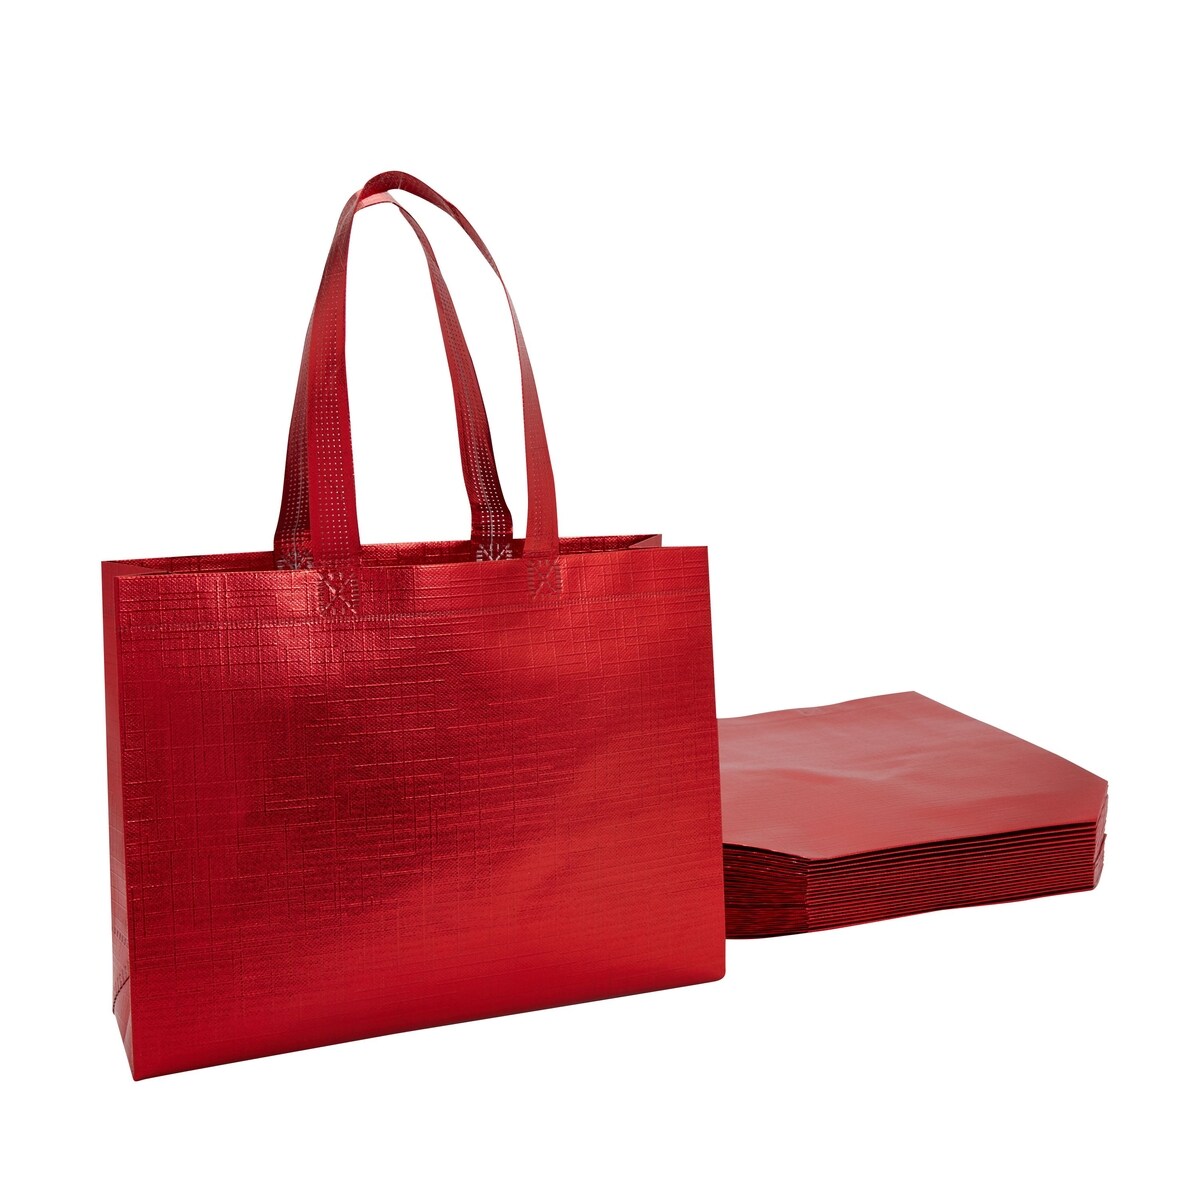 Elizabeth Arden Receive a FREE Red Tote with any $58 Elizabeth Arden  purchase. - Macy's